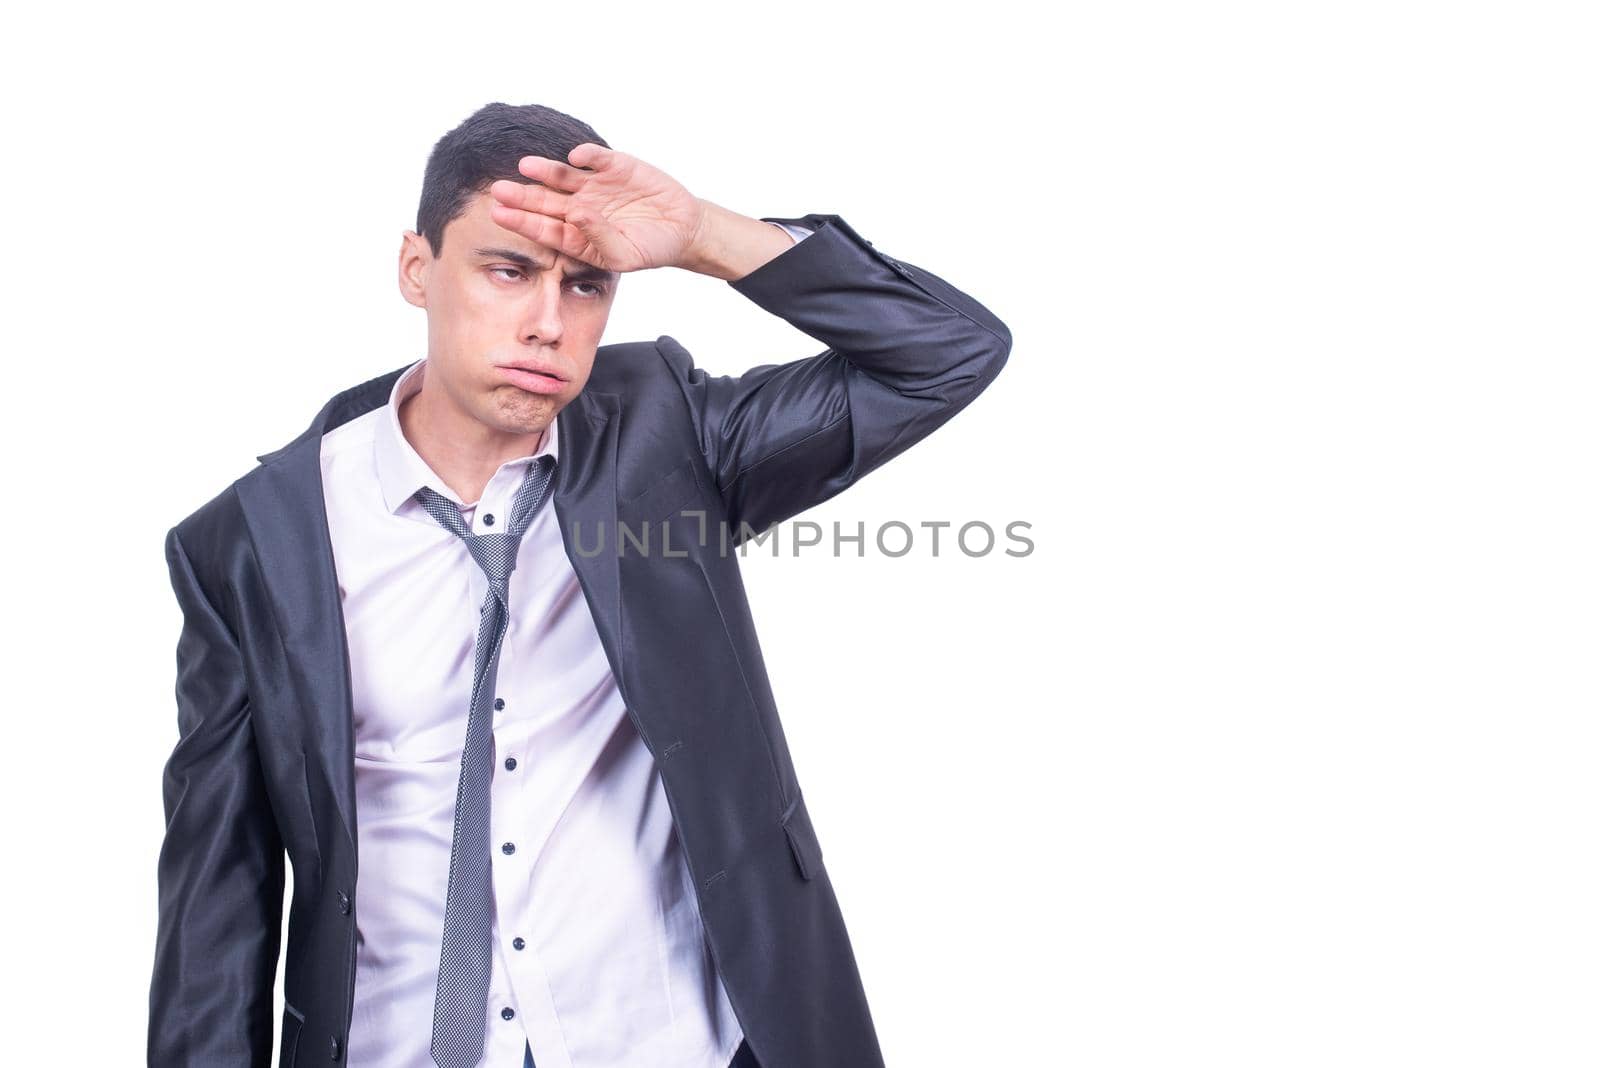 Stressed sloppy male entrepreneur in formal suit touching forehead and exhaling while standing isolated on white background in light studio